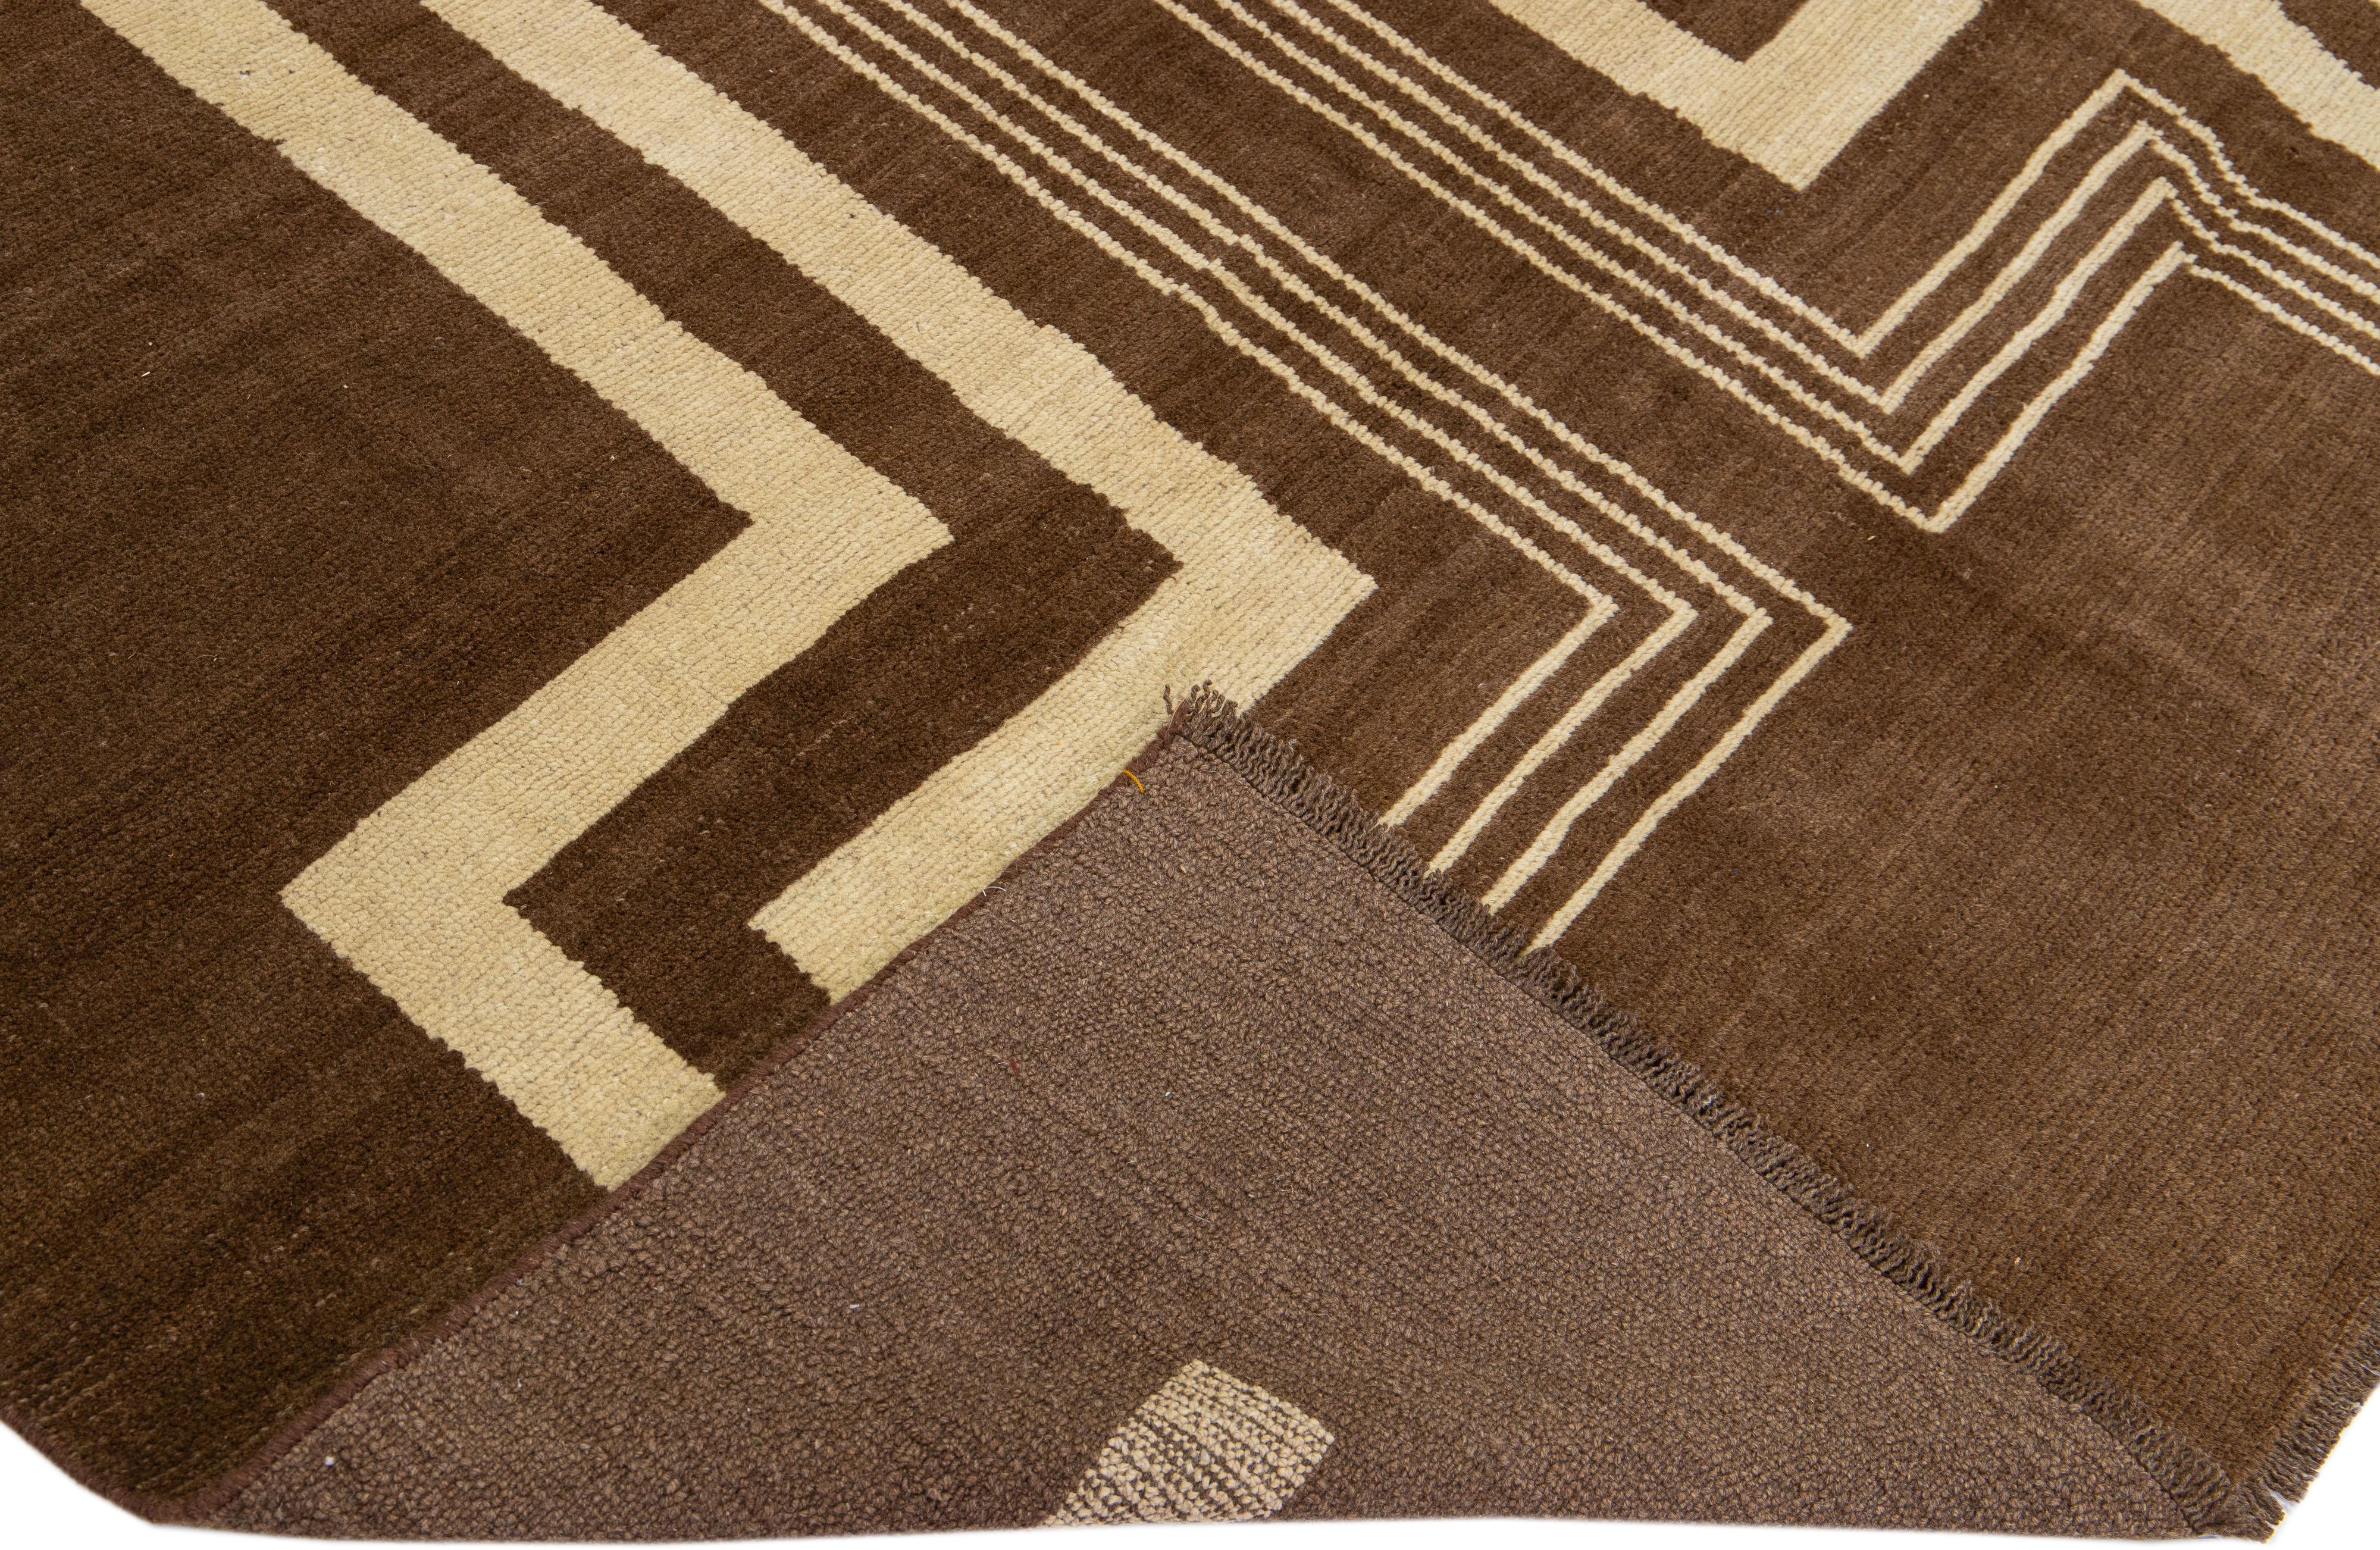 This Beautiful Modern Art Deco handmade wool rug makes part of our Northwest collection and features a brown color field and beige accents in a gorgeous geometric tribal design.

This rug measures: 7'4